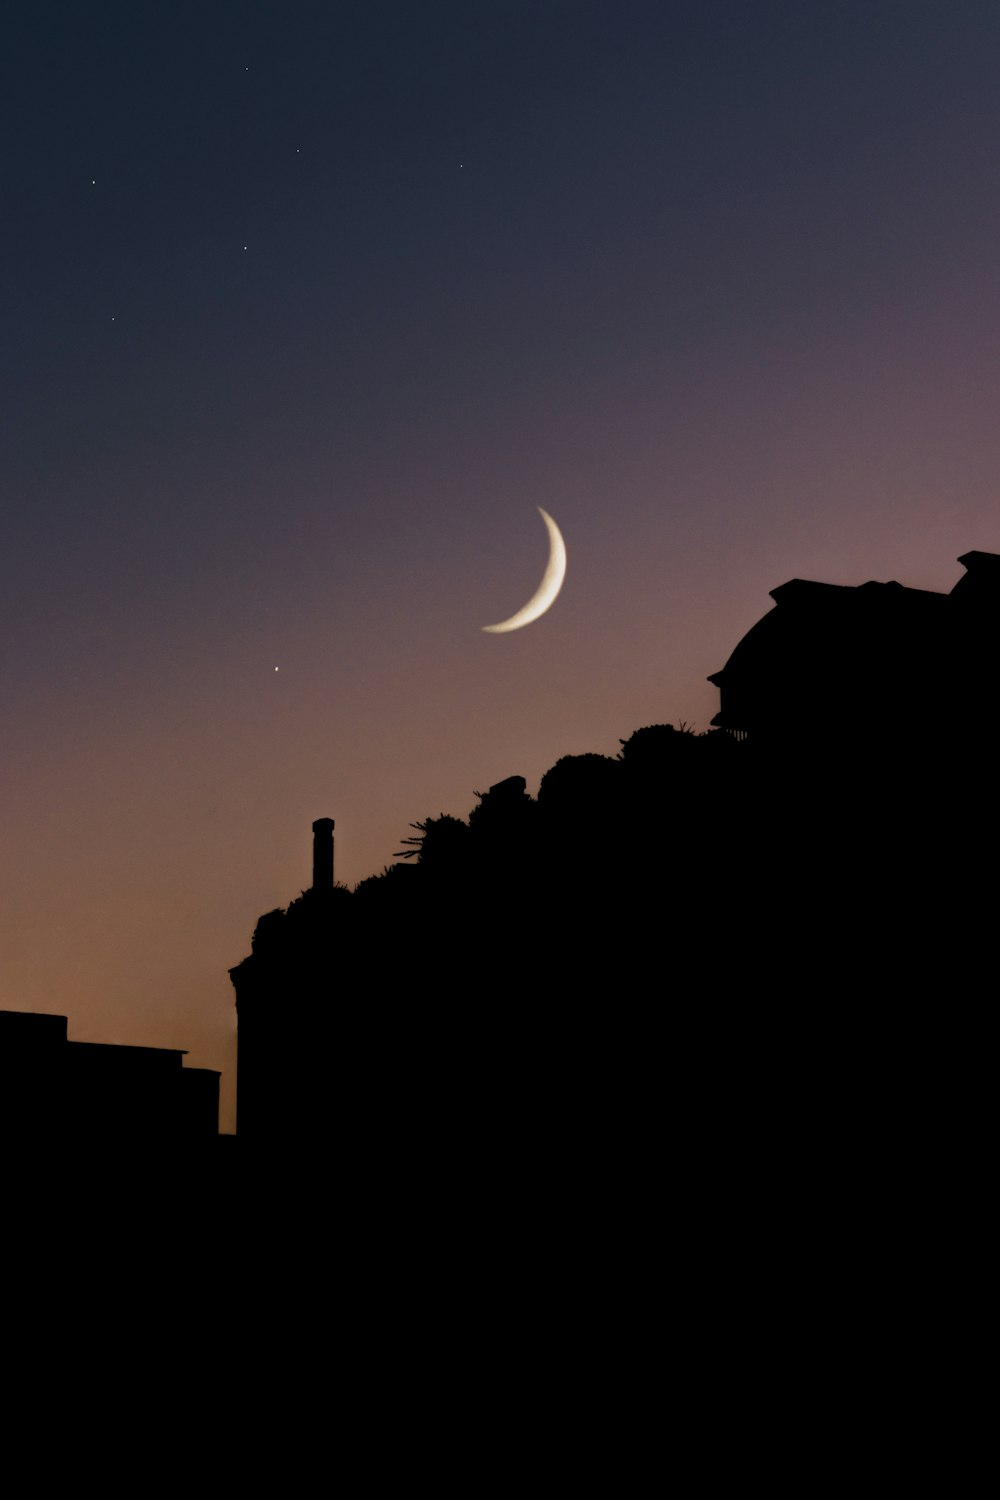 a crescent is seen in the night sky